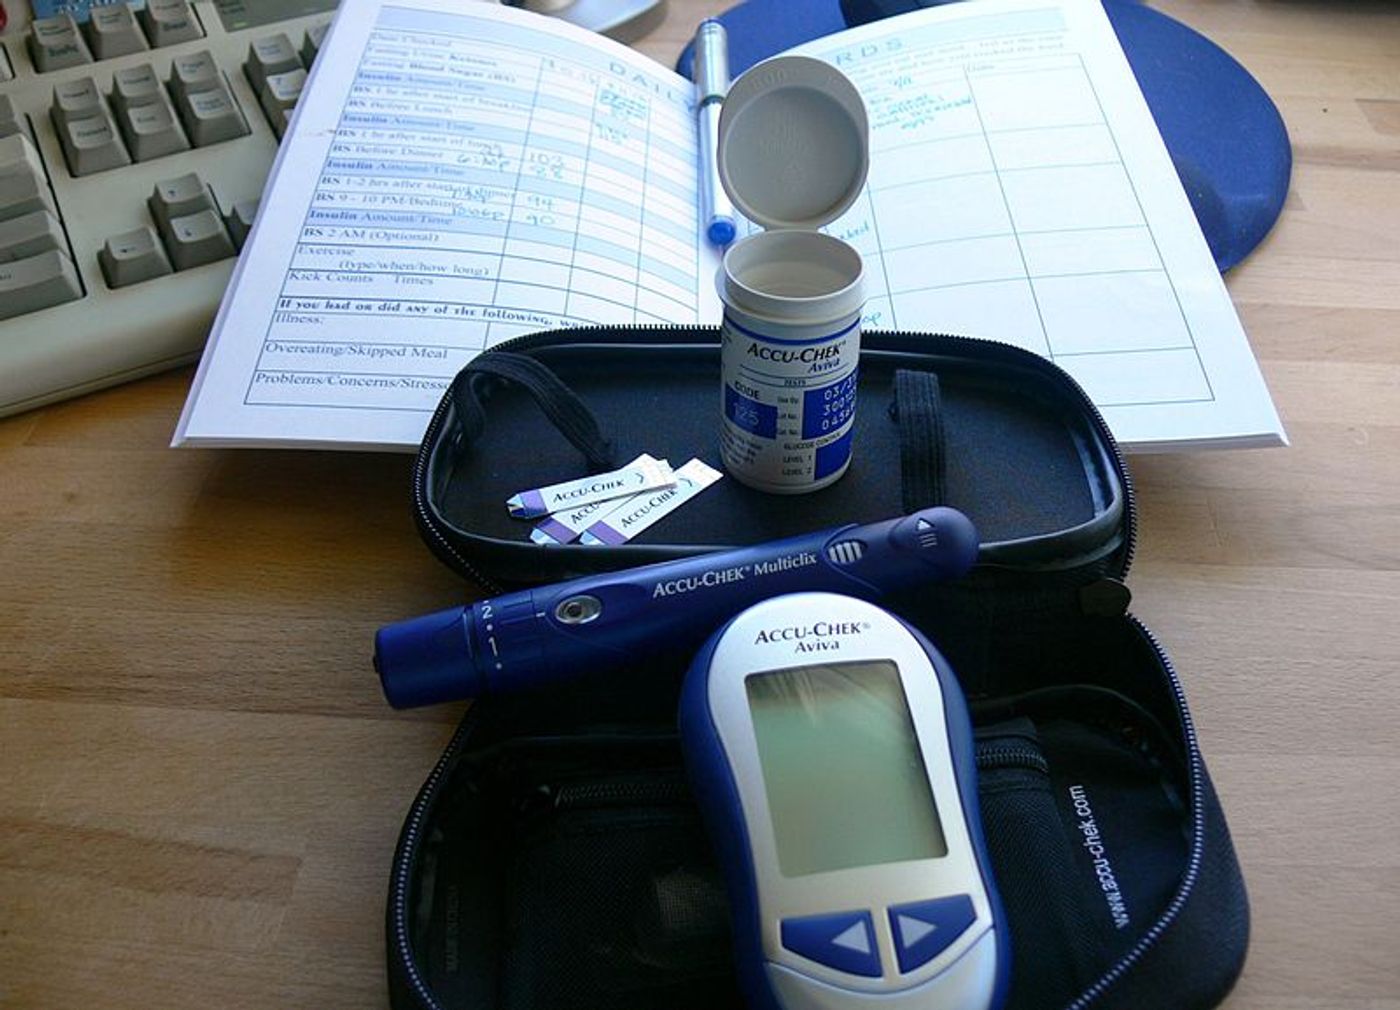 A kit used by a woman with gestational diabetes. Credit: Jessica Merz